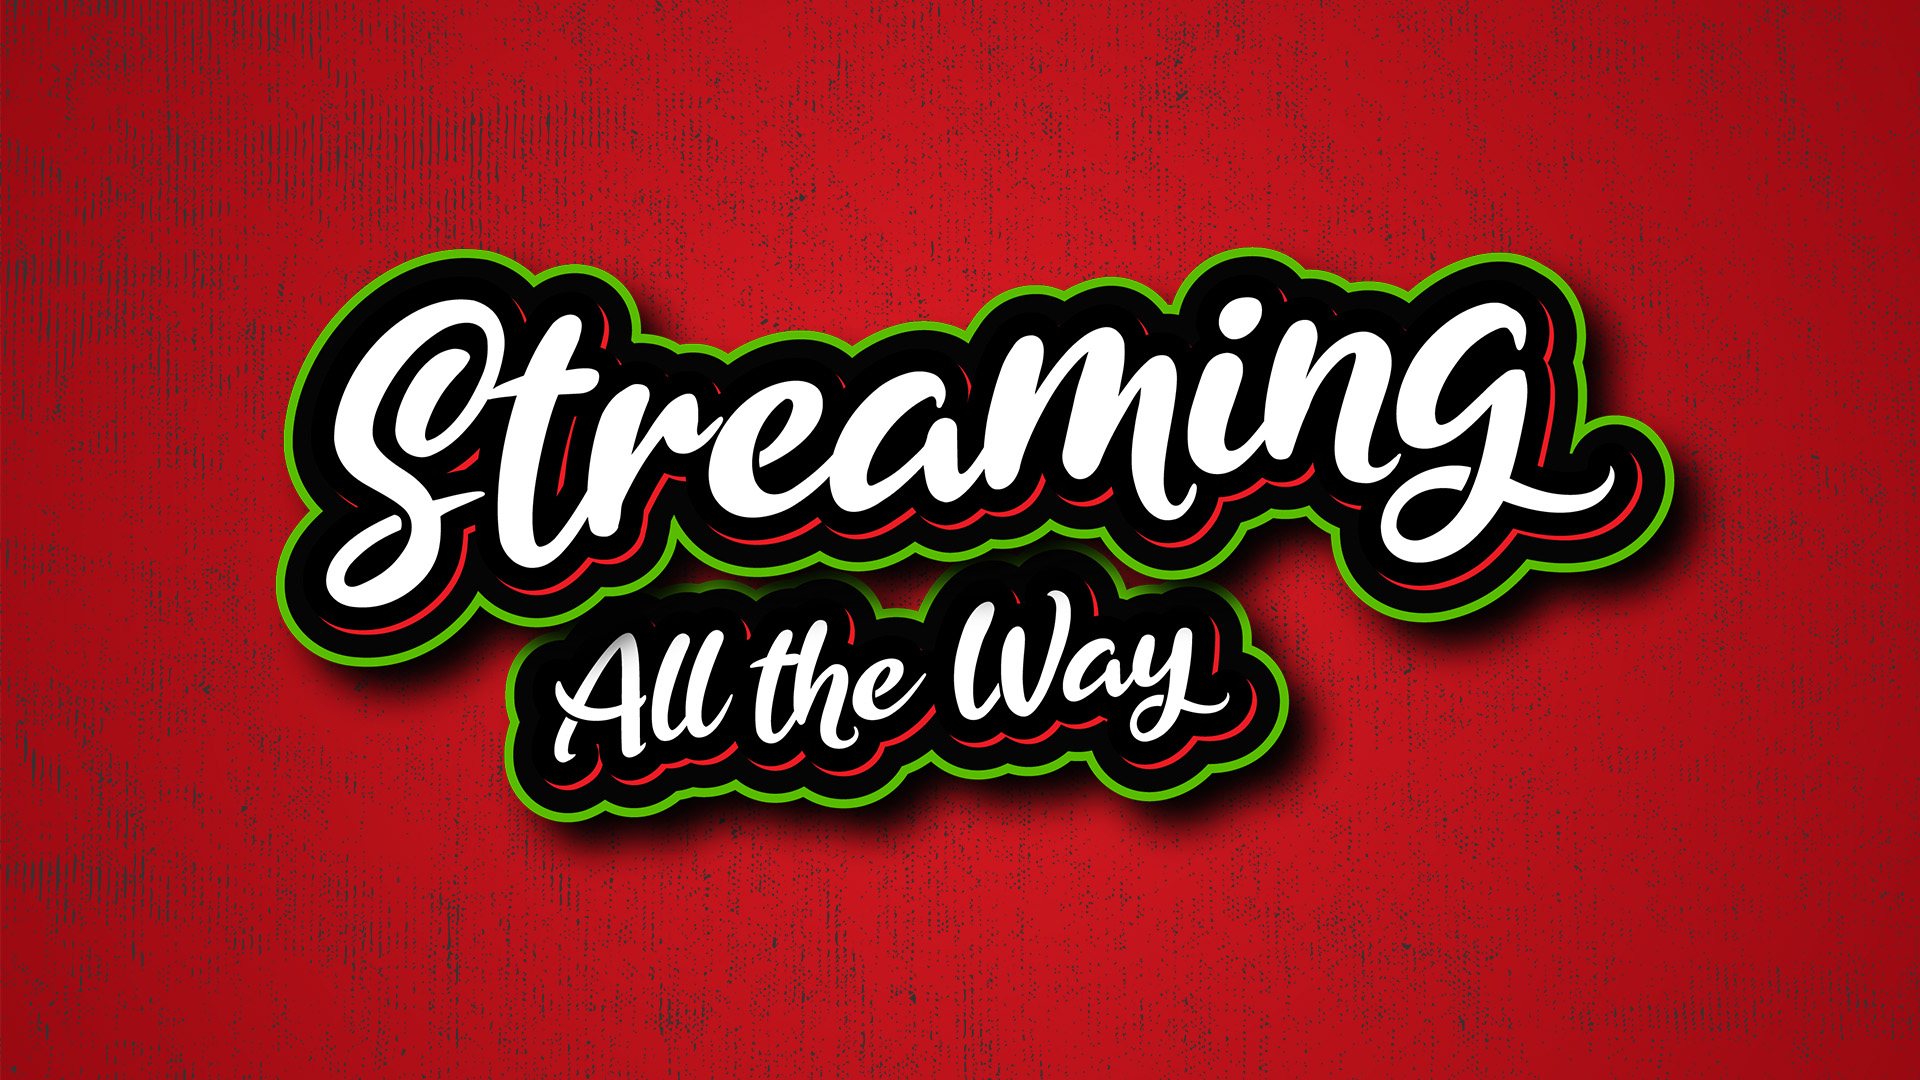 Streaming All The Way - Week 1